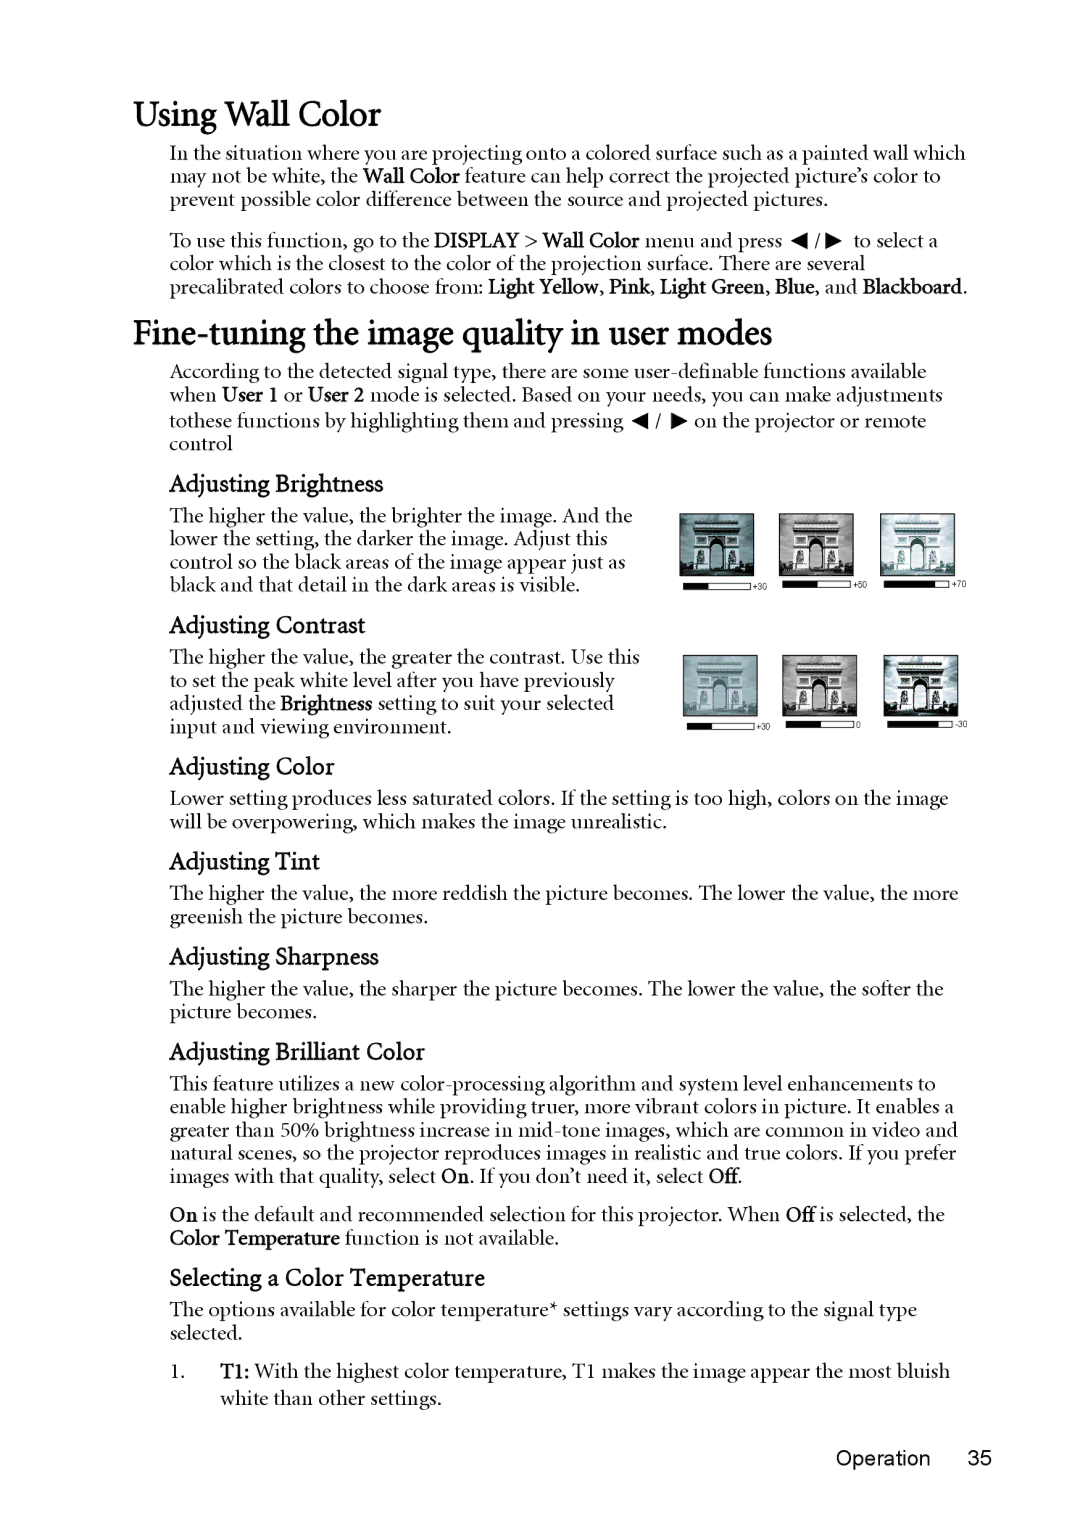 BenQ MW512 user manual Using Wall Color, Fine-tuning the image quality in user modes 